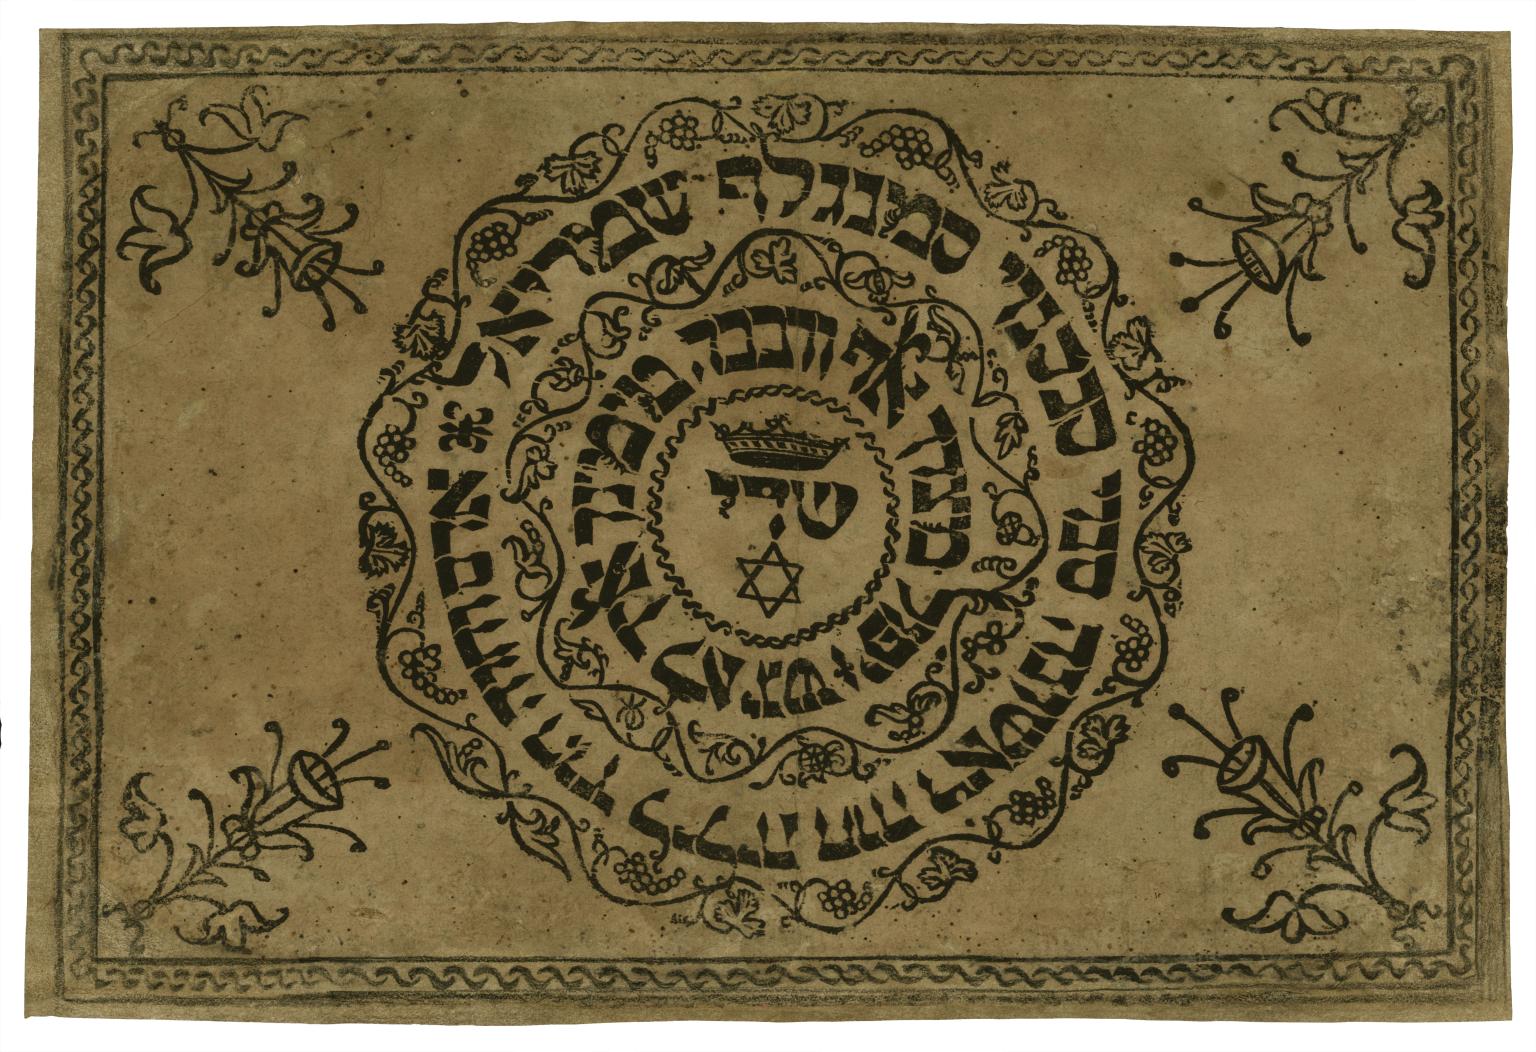 Printed page with Hebrew text in a circle framed by decorative motif with flower in each corner.